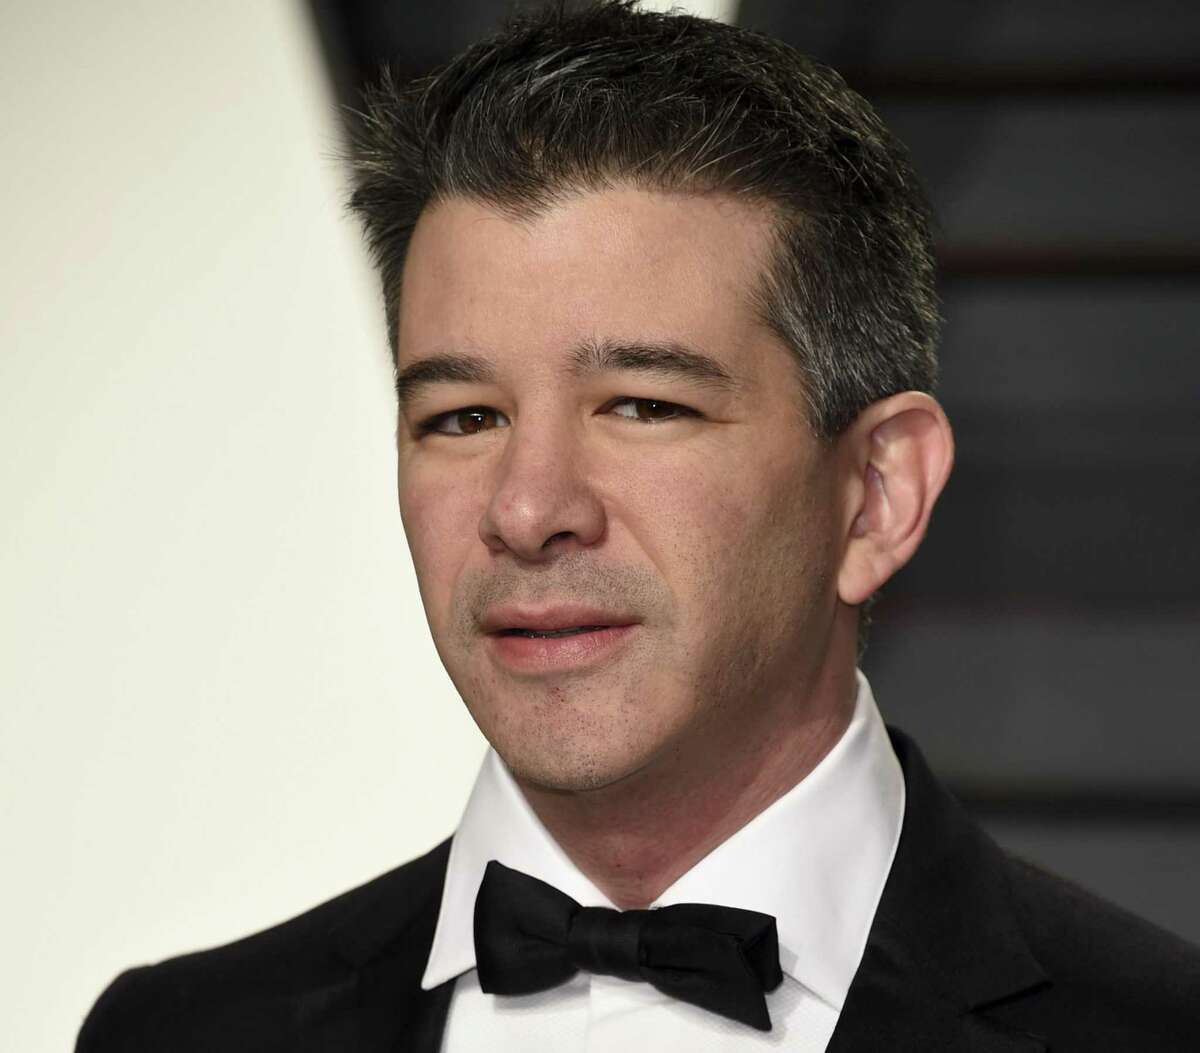 Embattled Uber CEO Travis Kalanick says the company will hire a chief operating officer who can partner with him to write its “next chapter.”